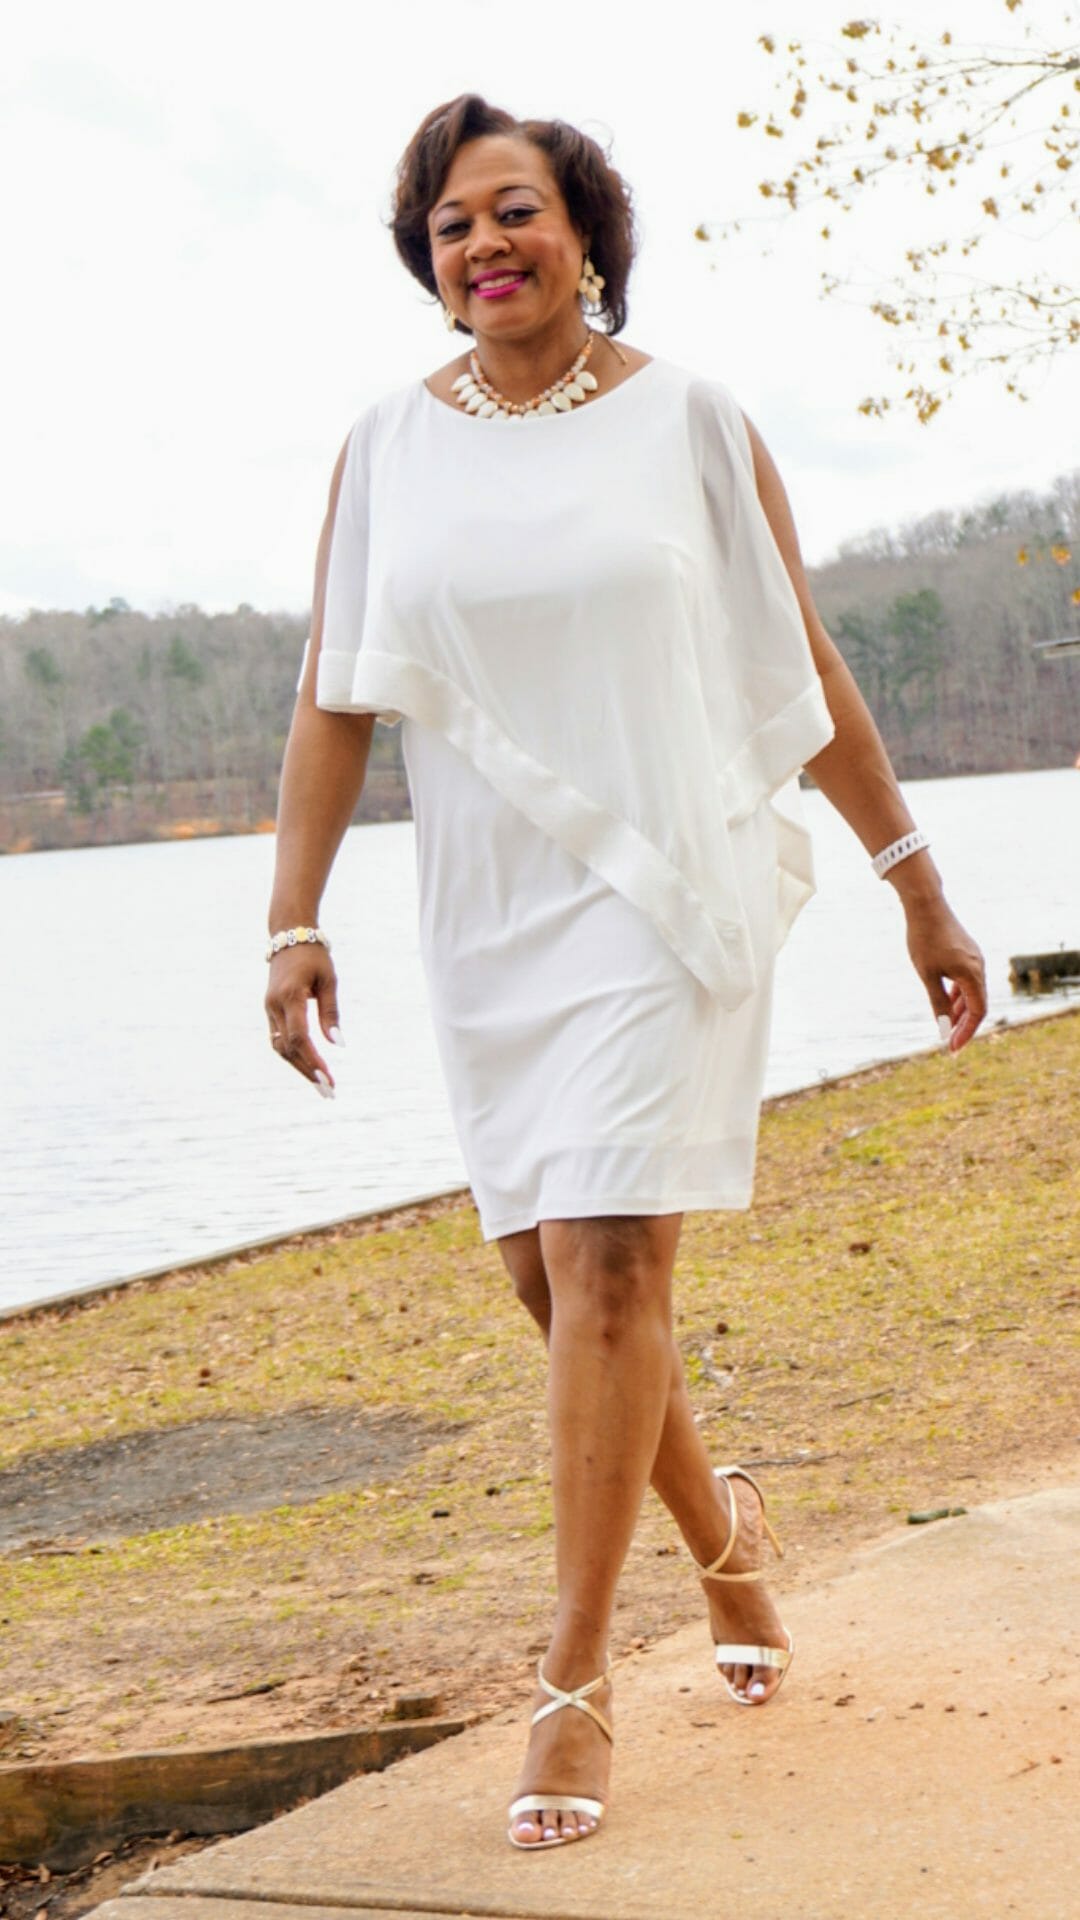 A smiling Midnight Velvet customer lakeside, in a white dress with satin trim on the cape-like top, and silver sandals.